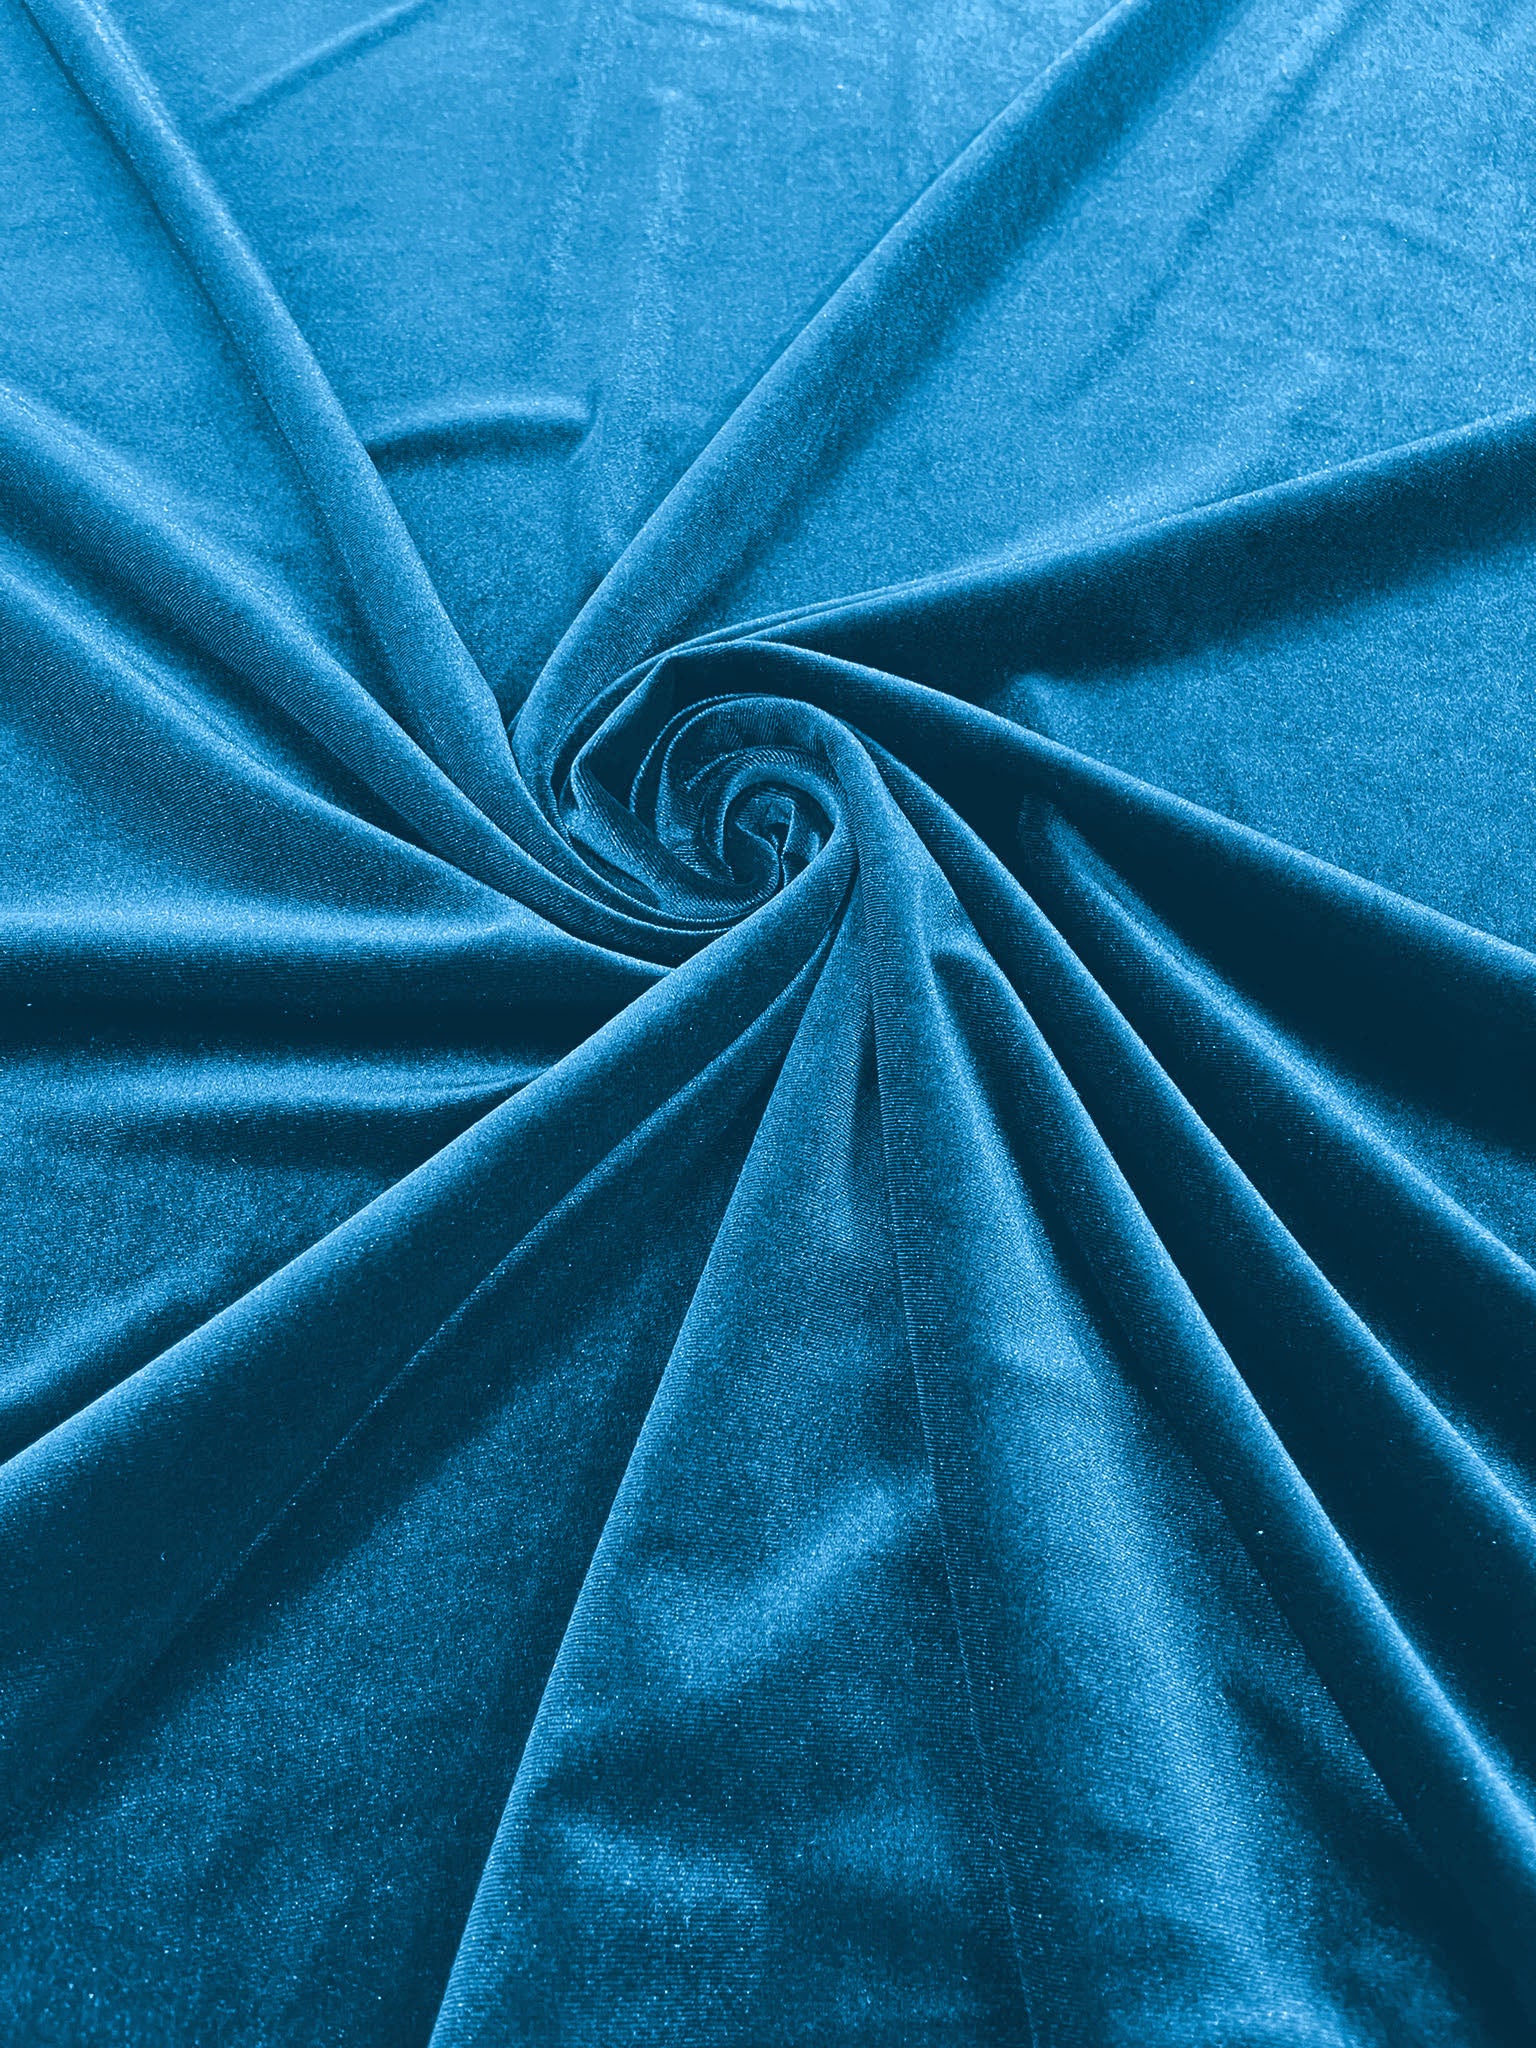 Turquoise Stretch Velvet Polyester Spandex 60" Wide | Plush Velvet For Christmas, Apparel, Cosplay, Curtains, Decoration, Costume